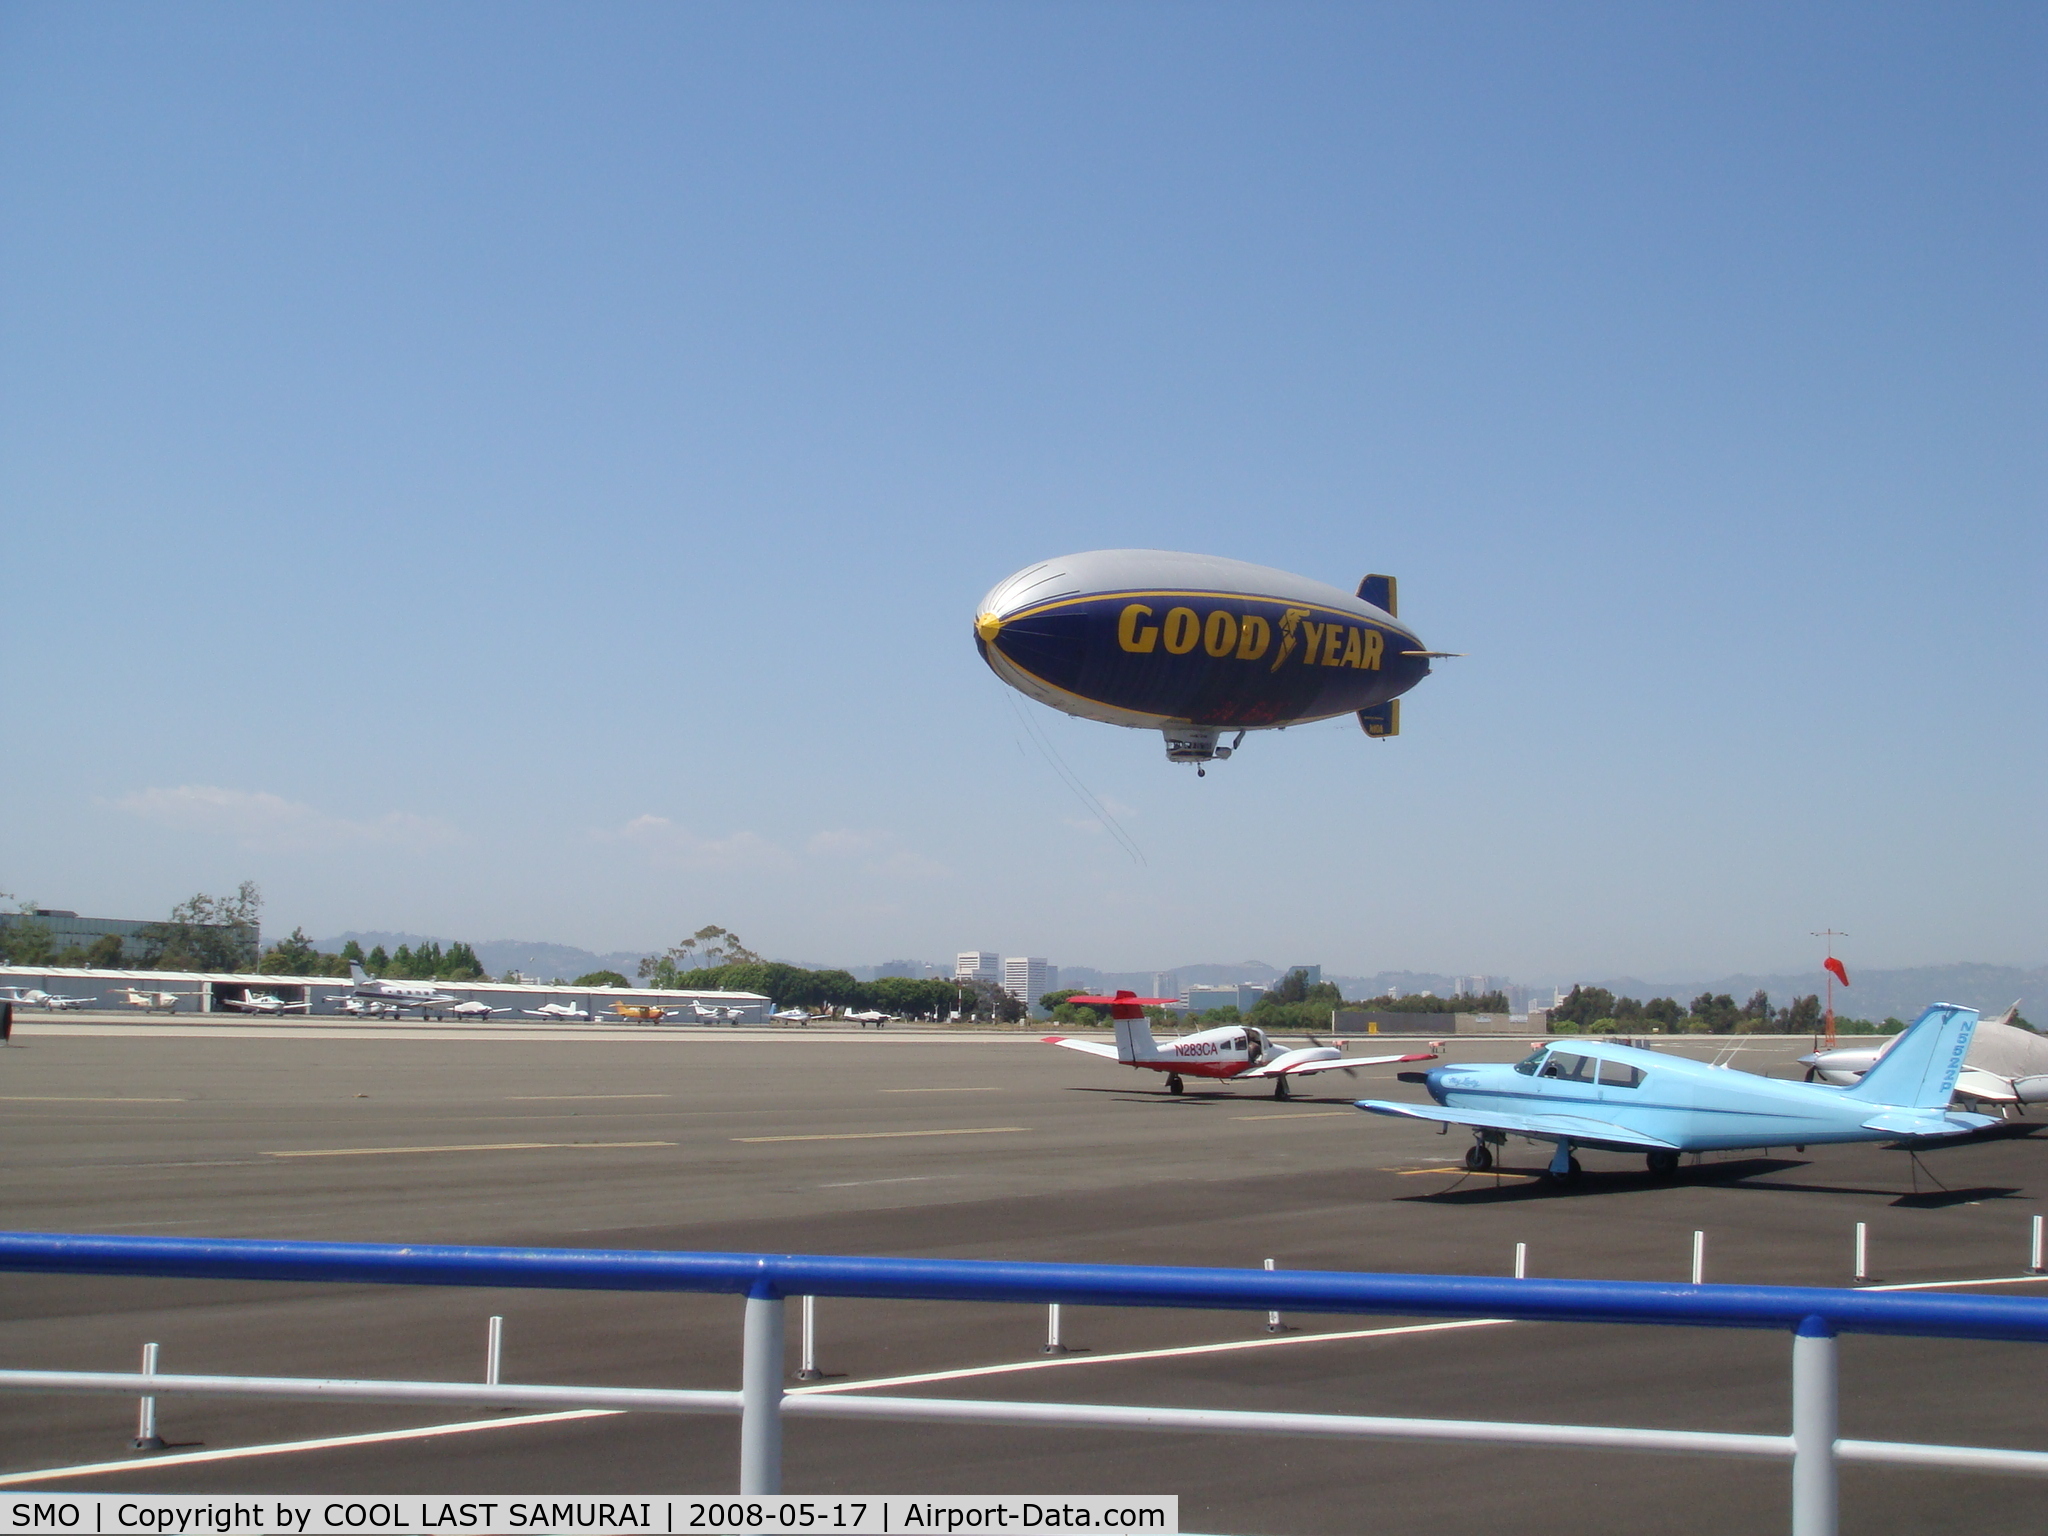 Santa Monica Municipal Airport (SMO) - Goodyear Blimp low approach at SMO Rwy21